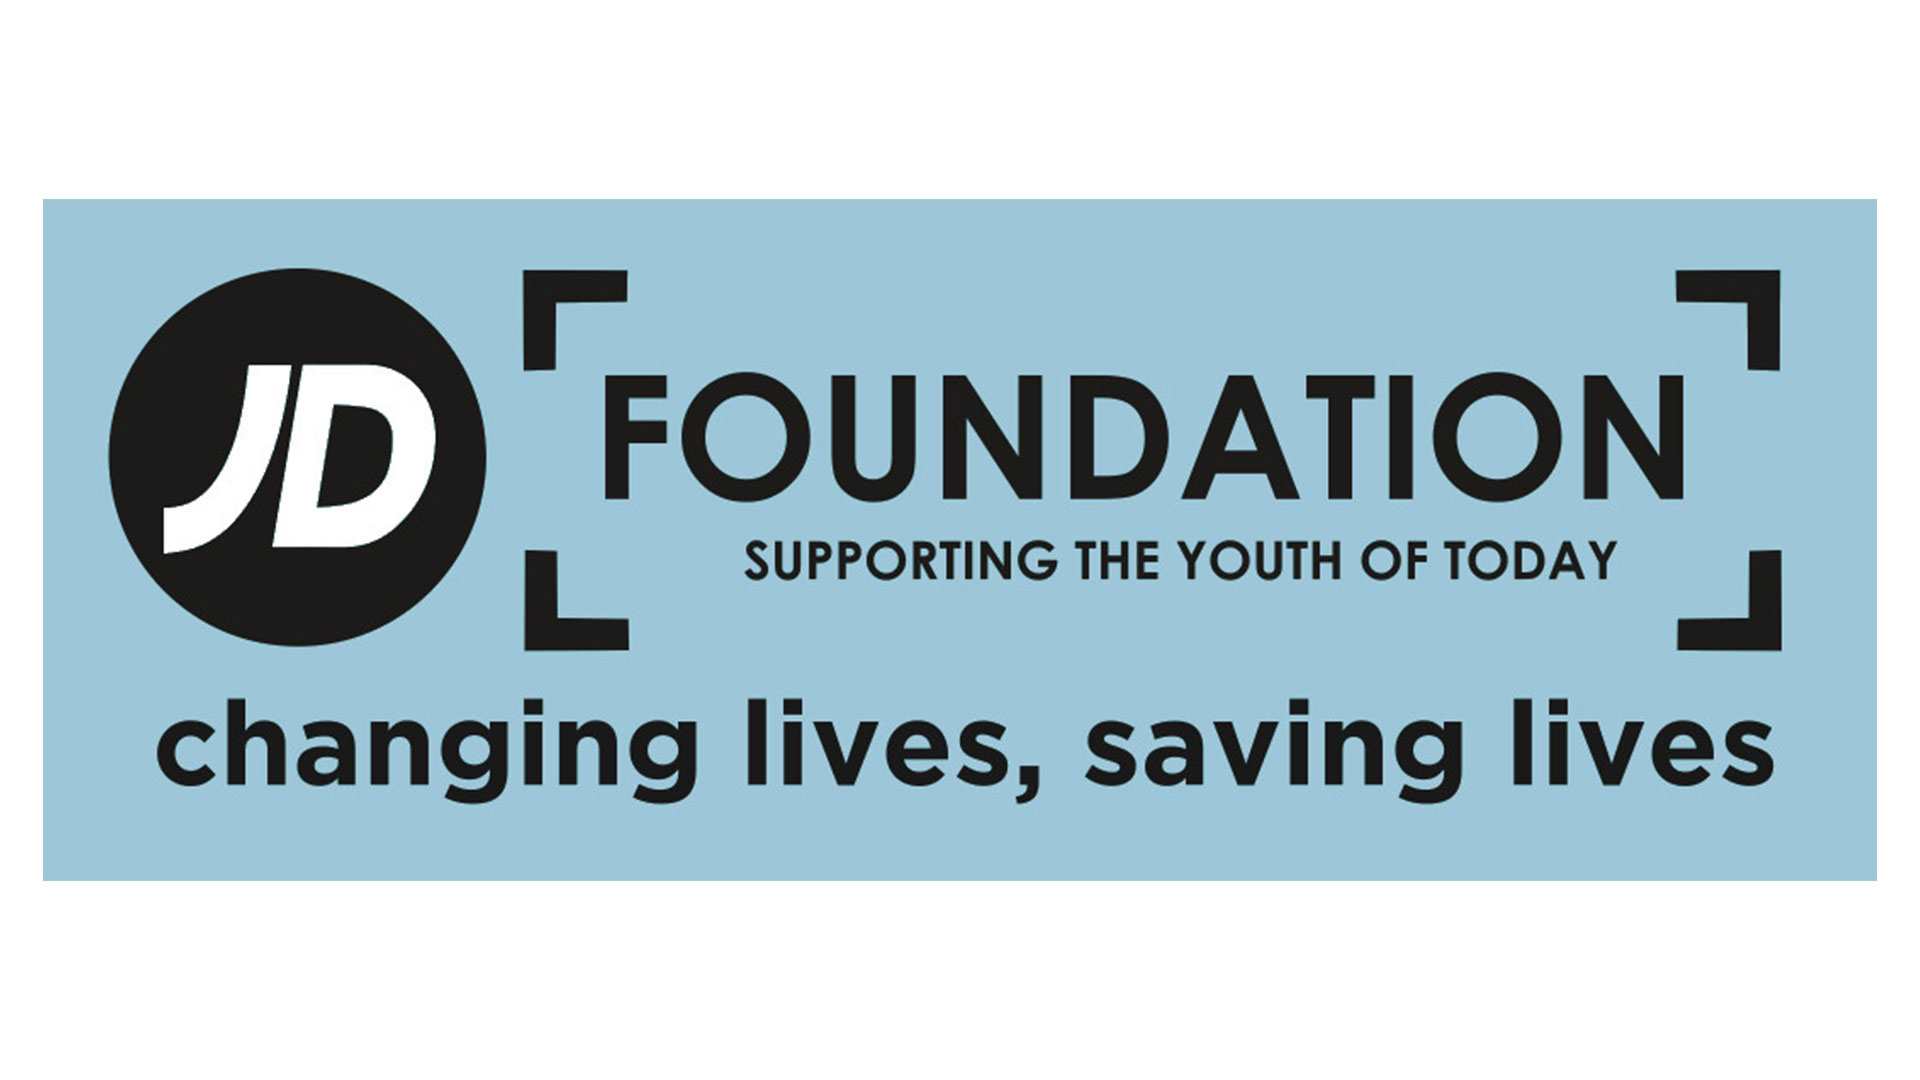 JD Foundation logo, supporting the youth of today, changing lives, saving lives.